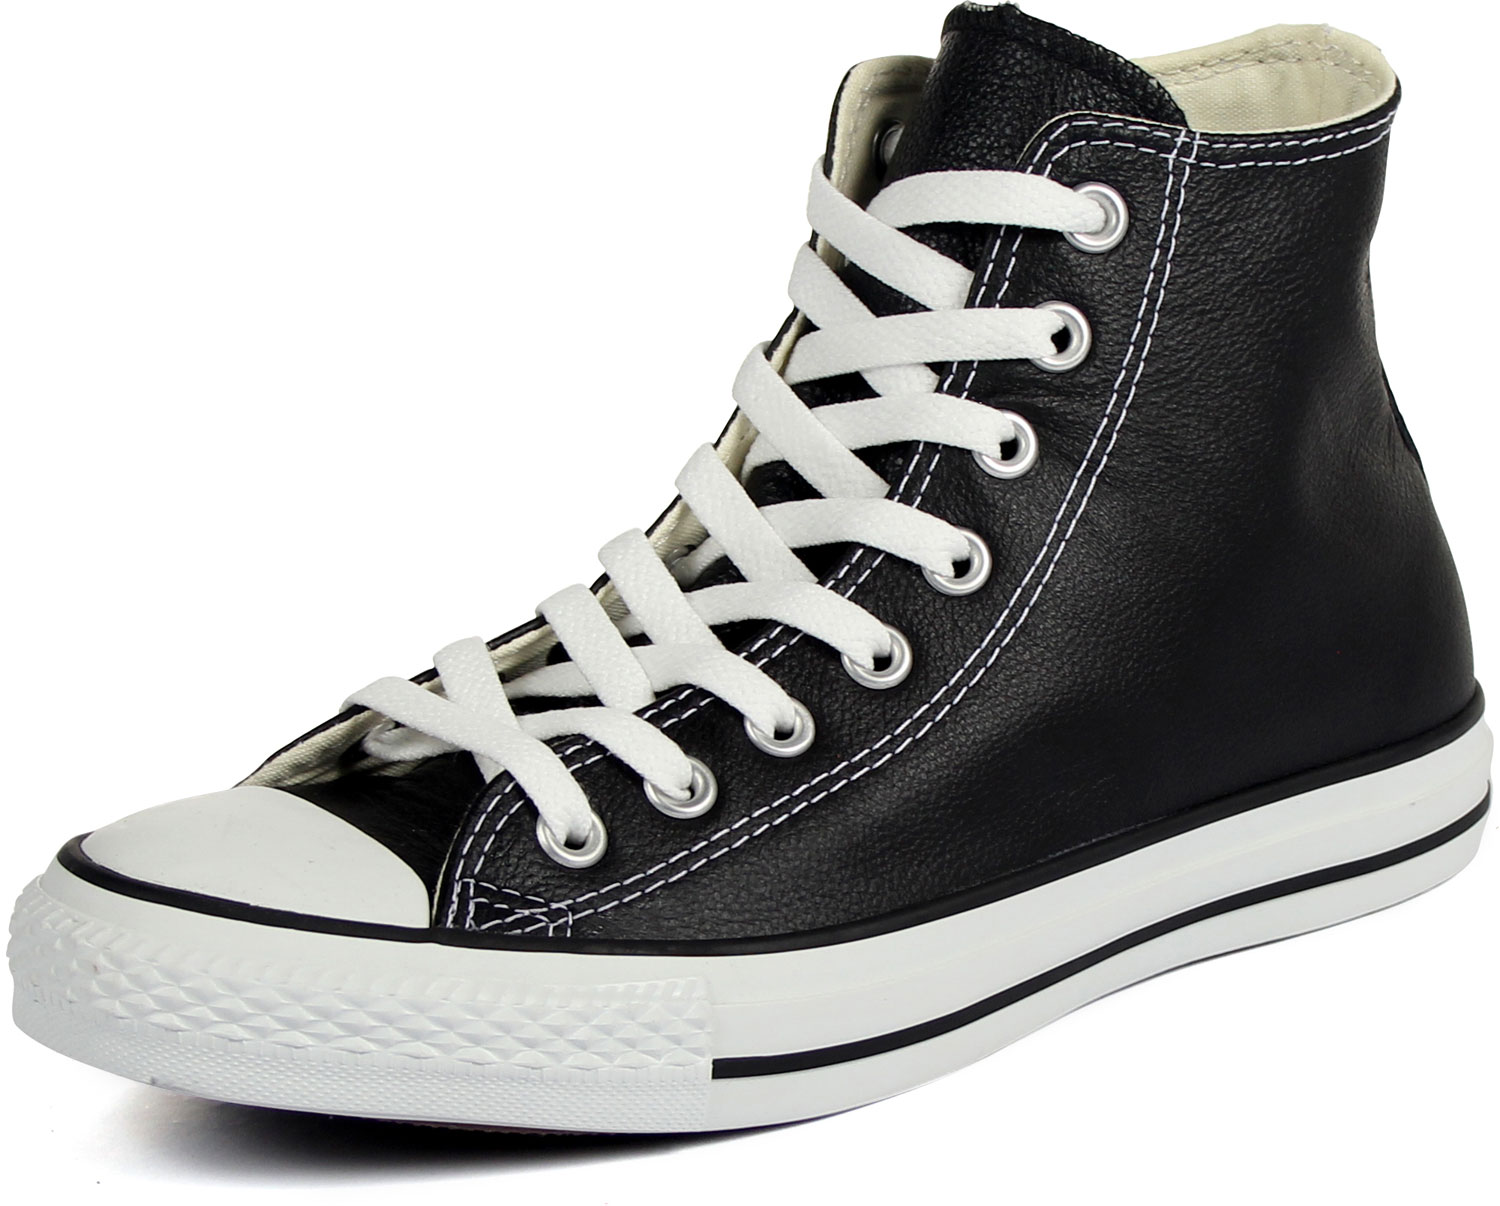 Converse Chuck Taylor All Star Shoes (1T406) Leather Hi White Monochrome